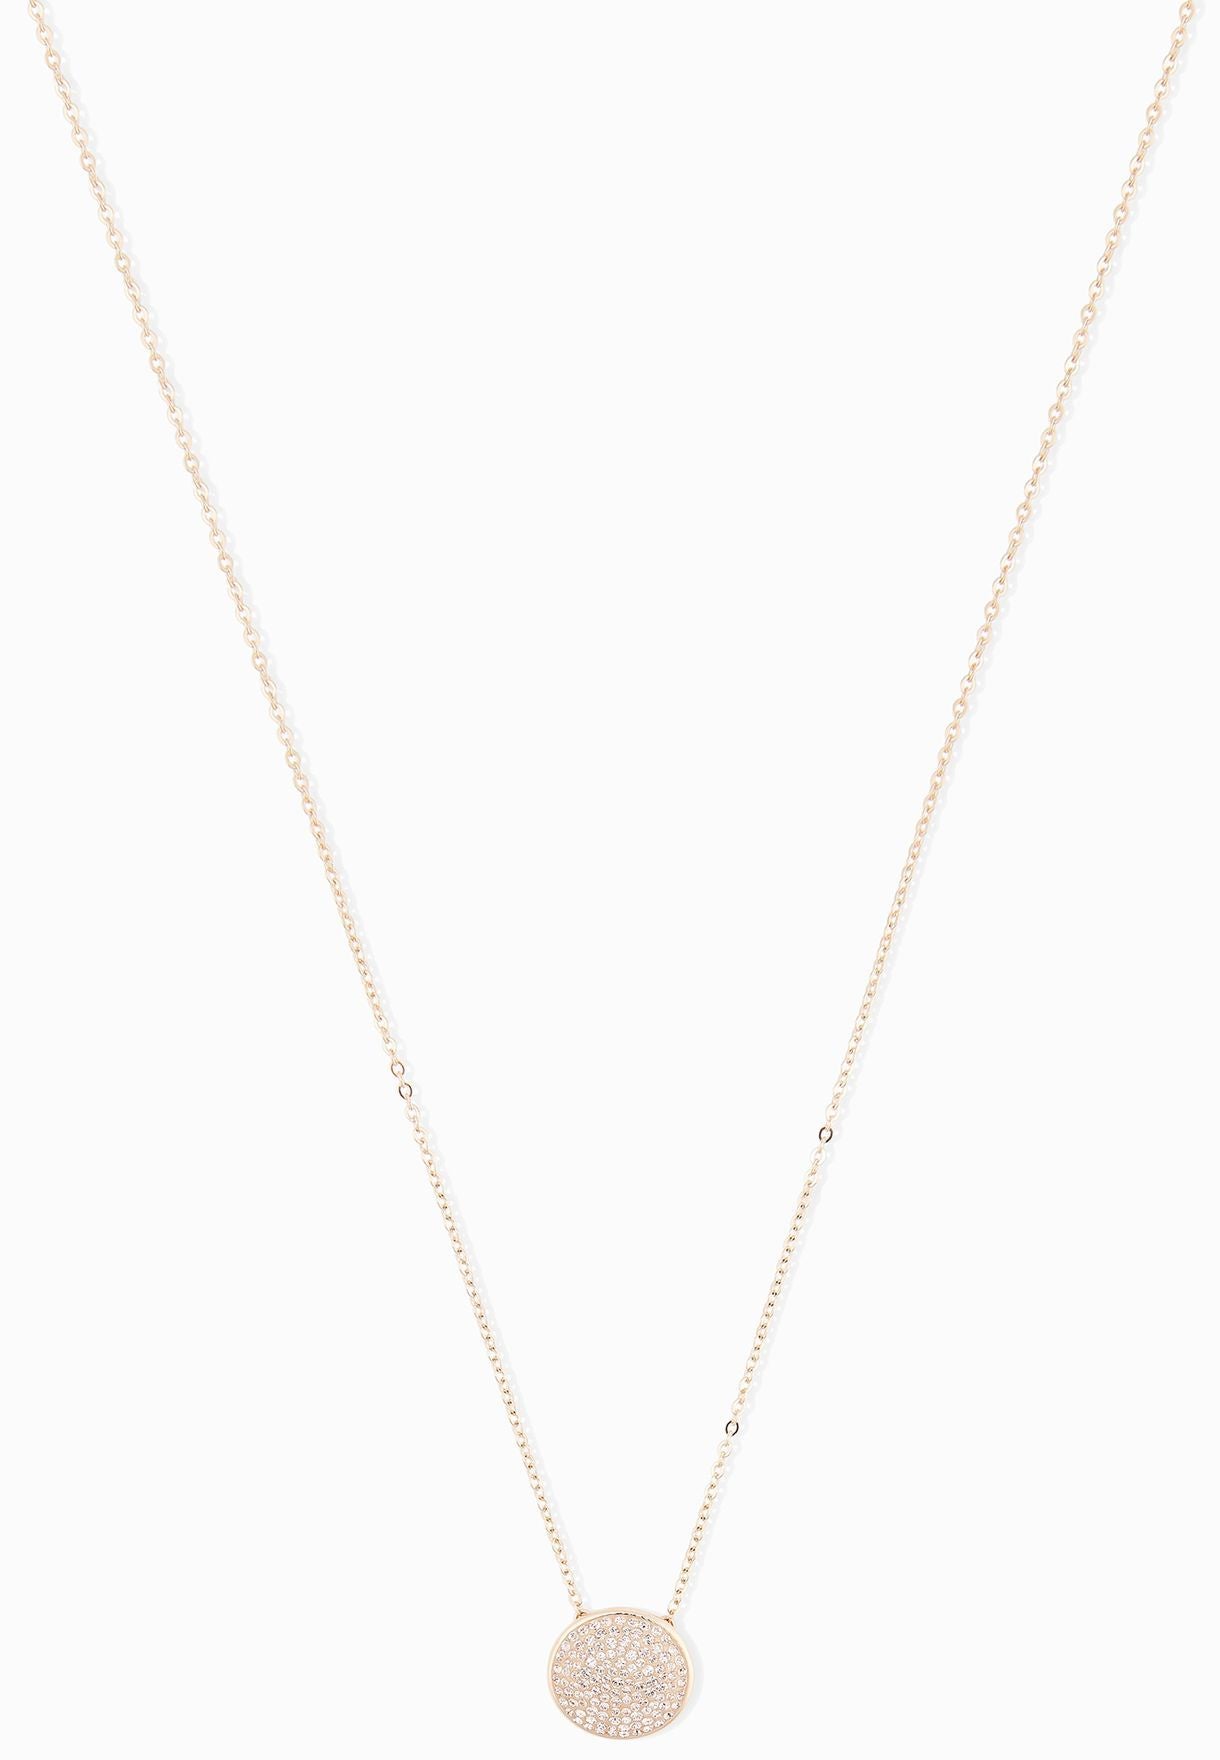 SWAROVSKI Rose Gold Earring and Necklace Fun Set #5227970